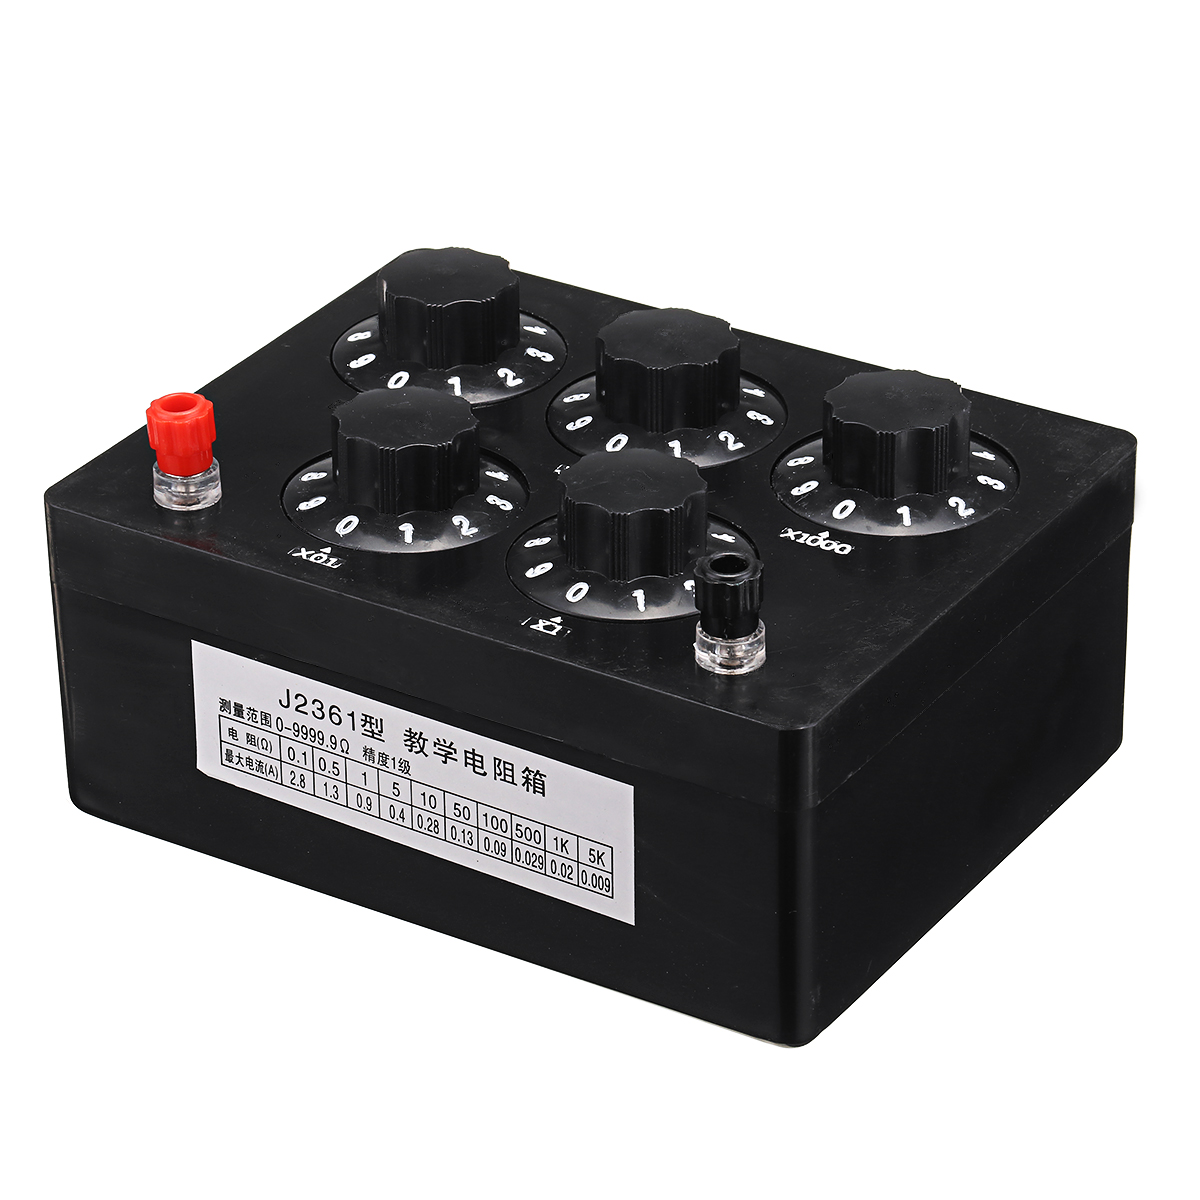 0-99999Omega-Variable-Resistor-Substitution-Box-Ohm-Adjustable-Substitution-Resistance-Knob-Switch-P-1443989-2